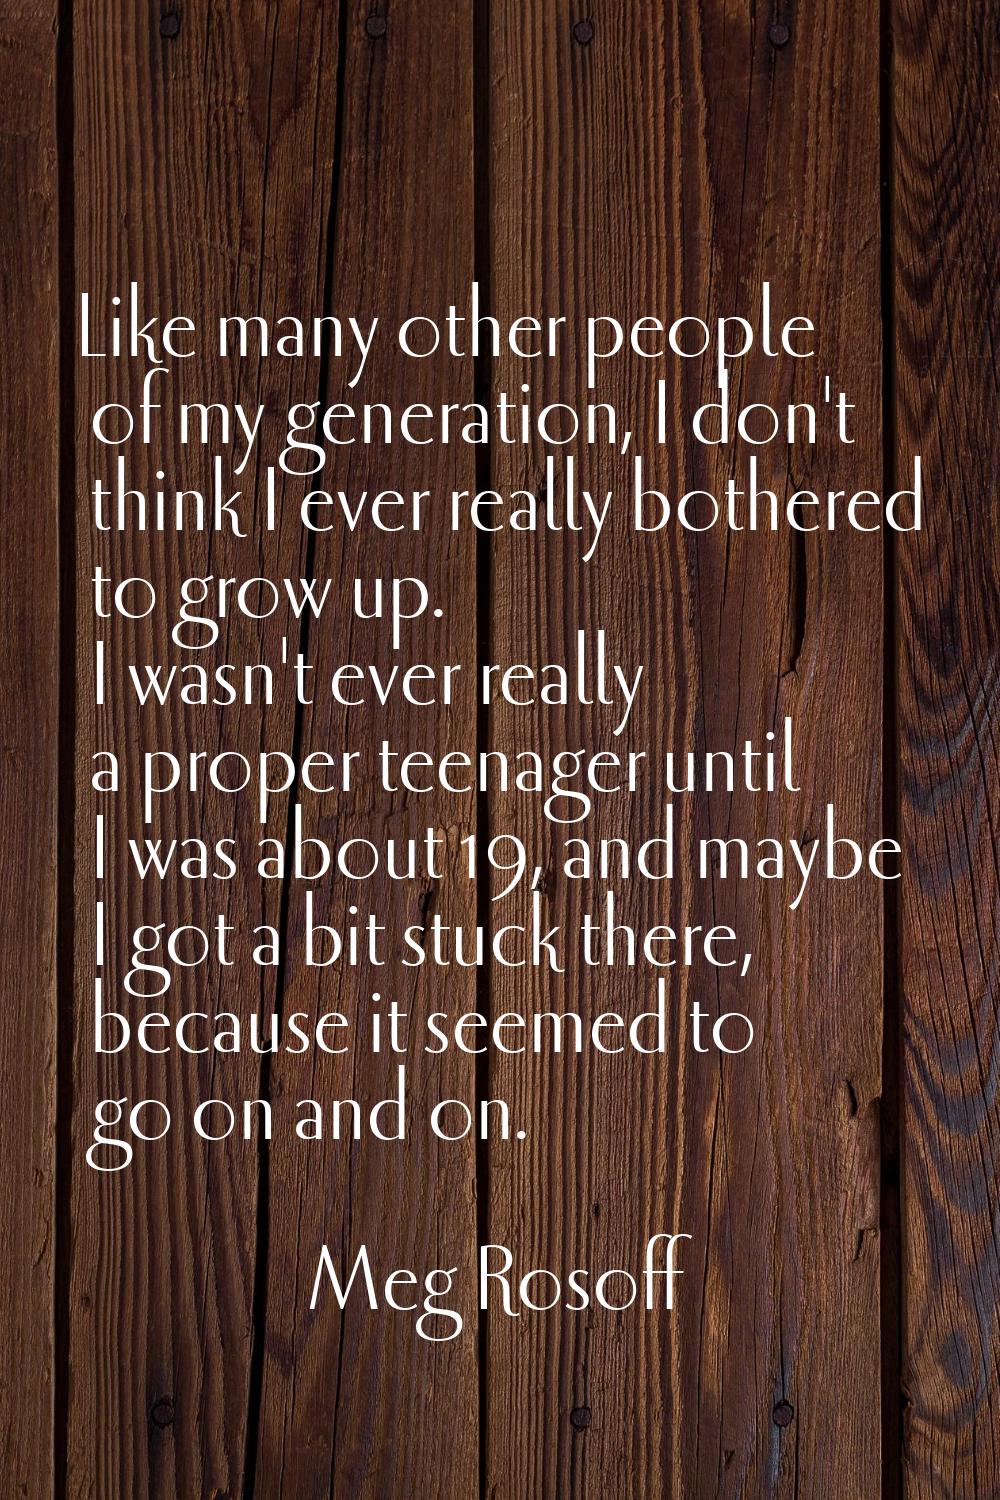 Like many other people of my generation, I don't think I ever really bothered to grow up. I wasn't 